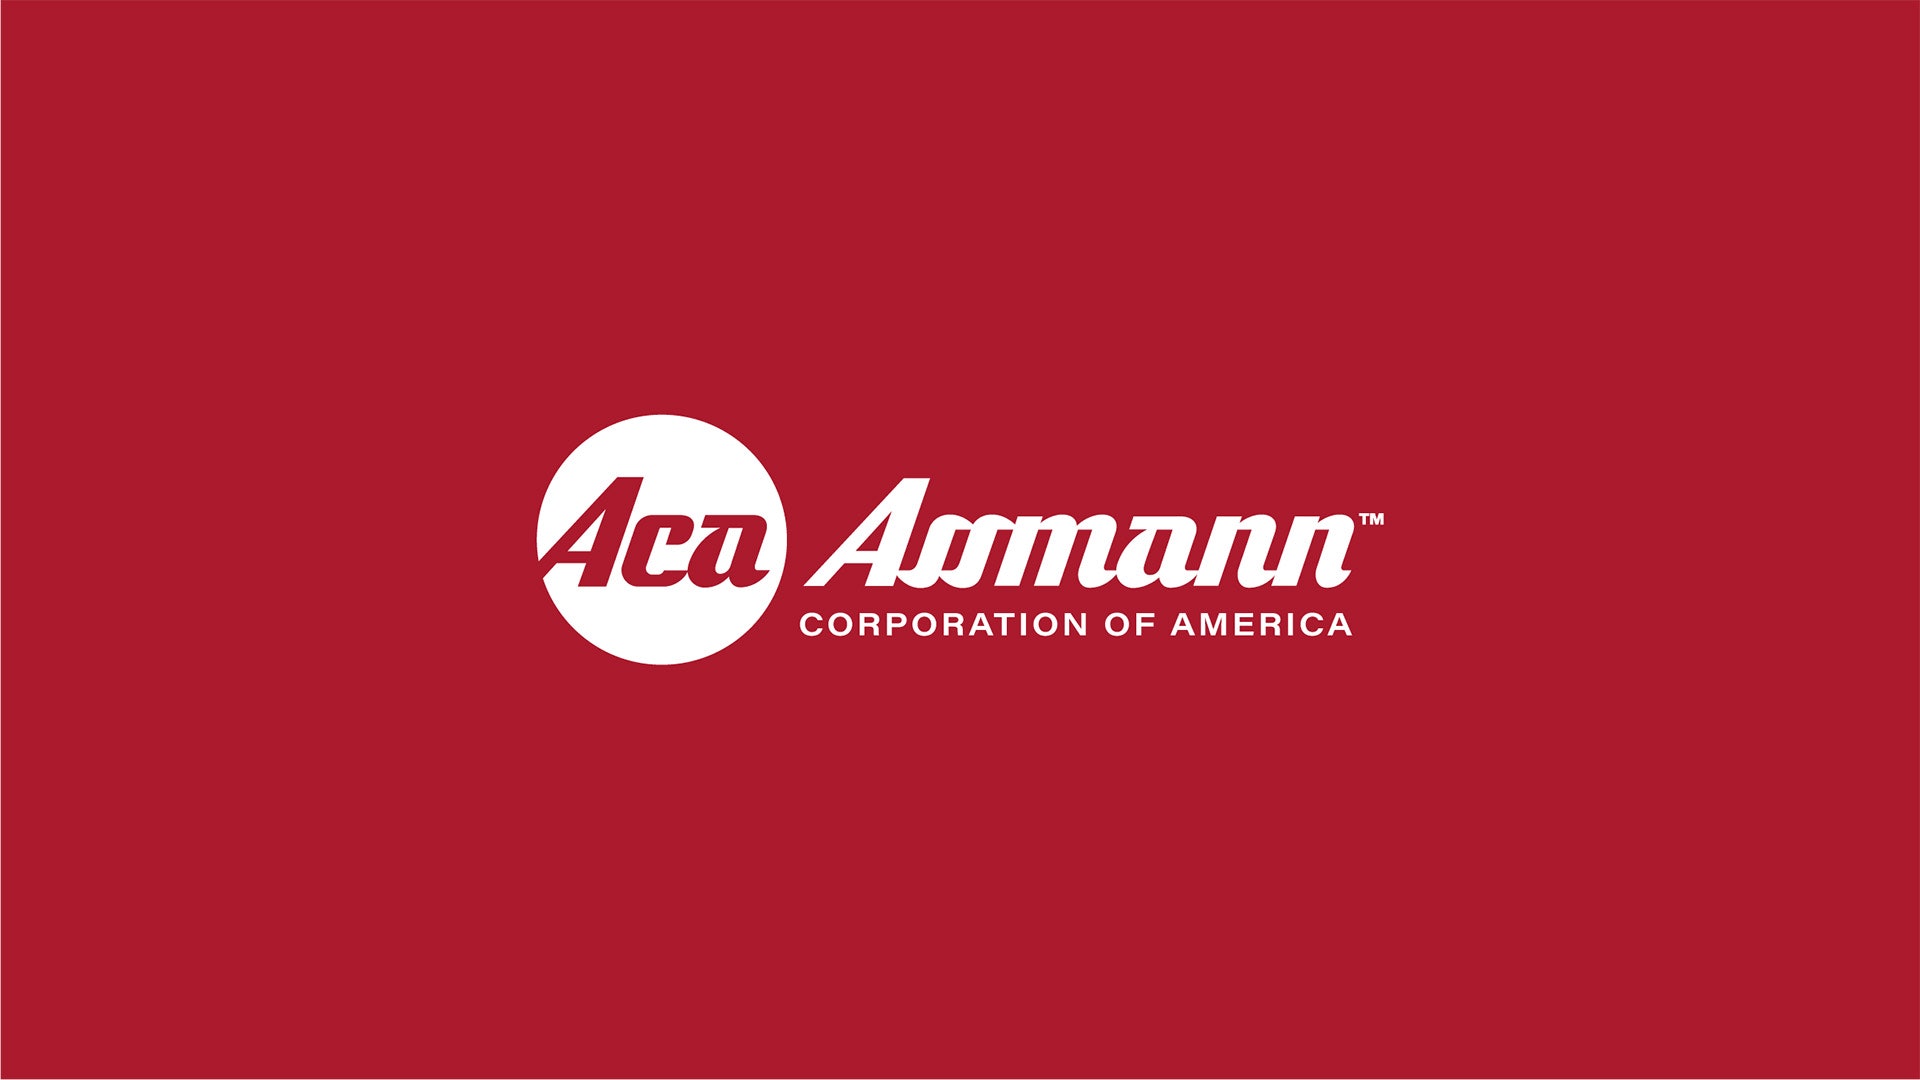 Assmann Corporation of America: A Name That Deserves to Be Known